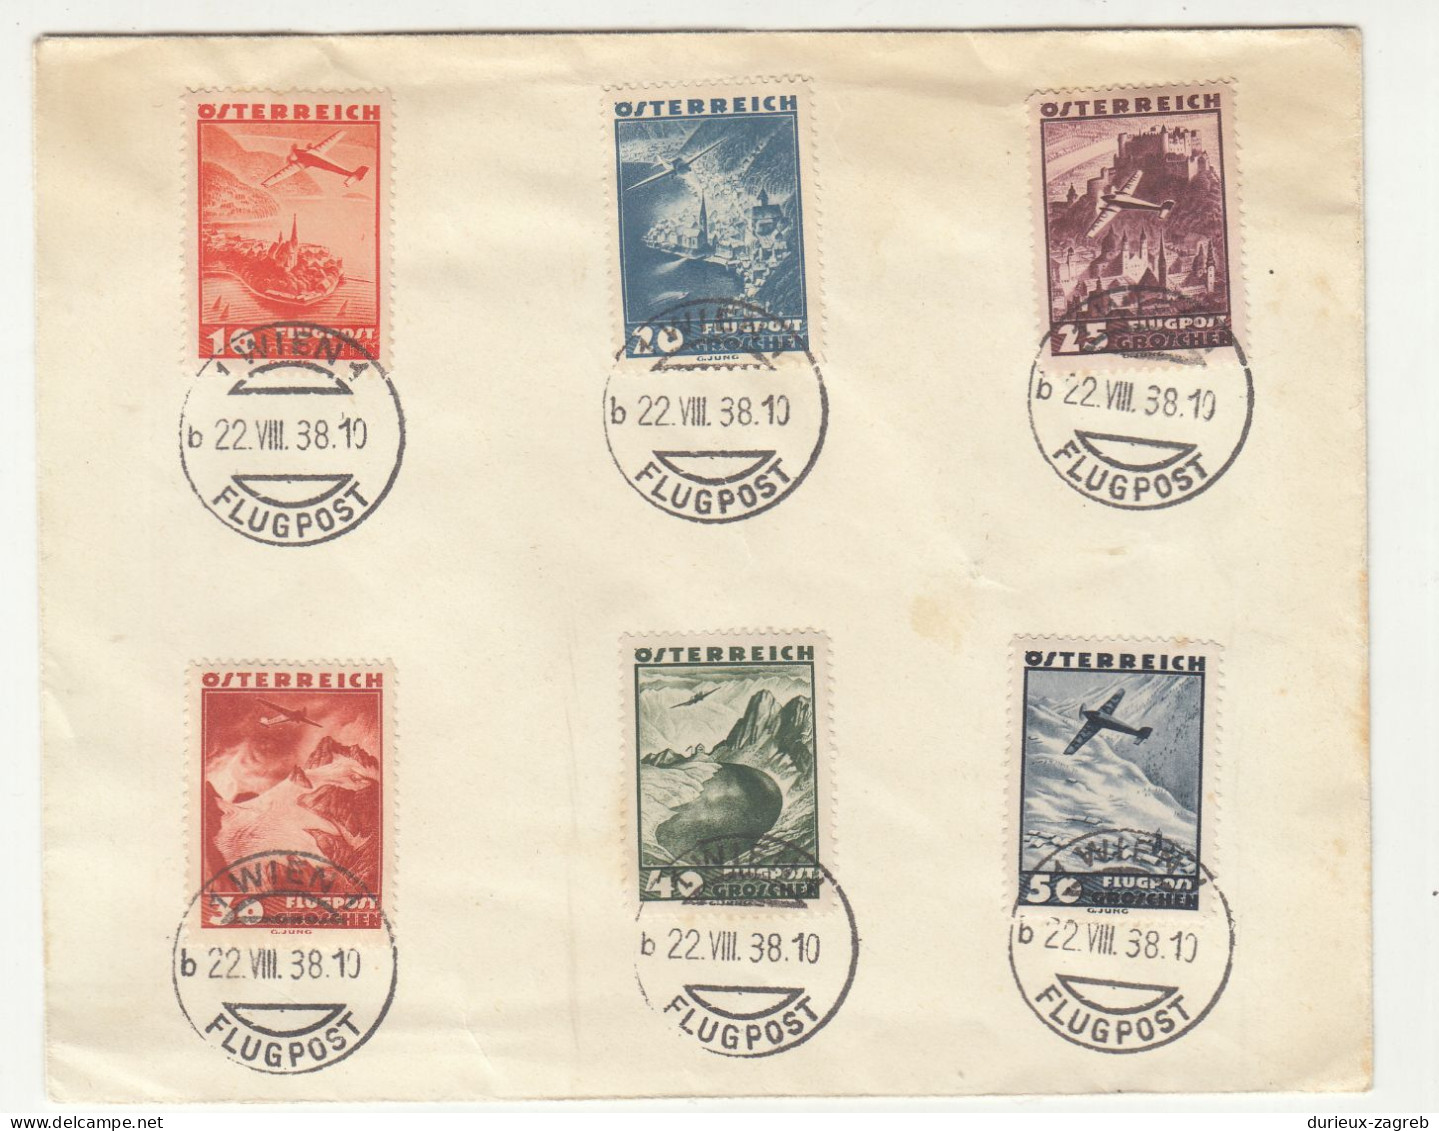 Austria 1938 Air Mail Stamps Postmarked On Letter Cover Not Posted B240401 - Gebraucht